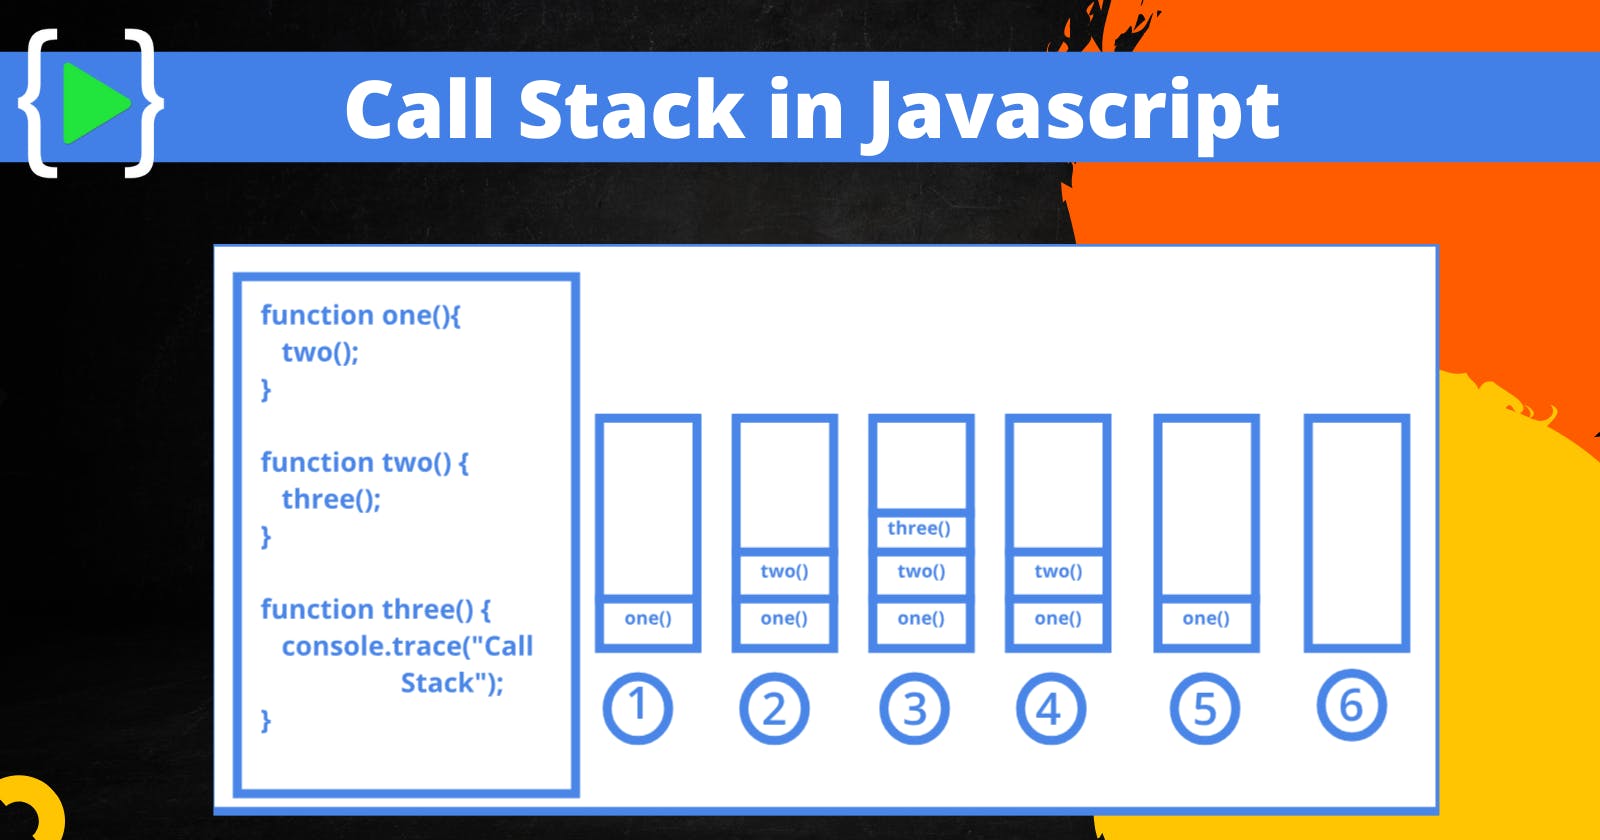 Call Stack in JavaScript